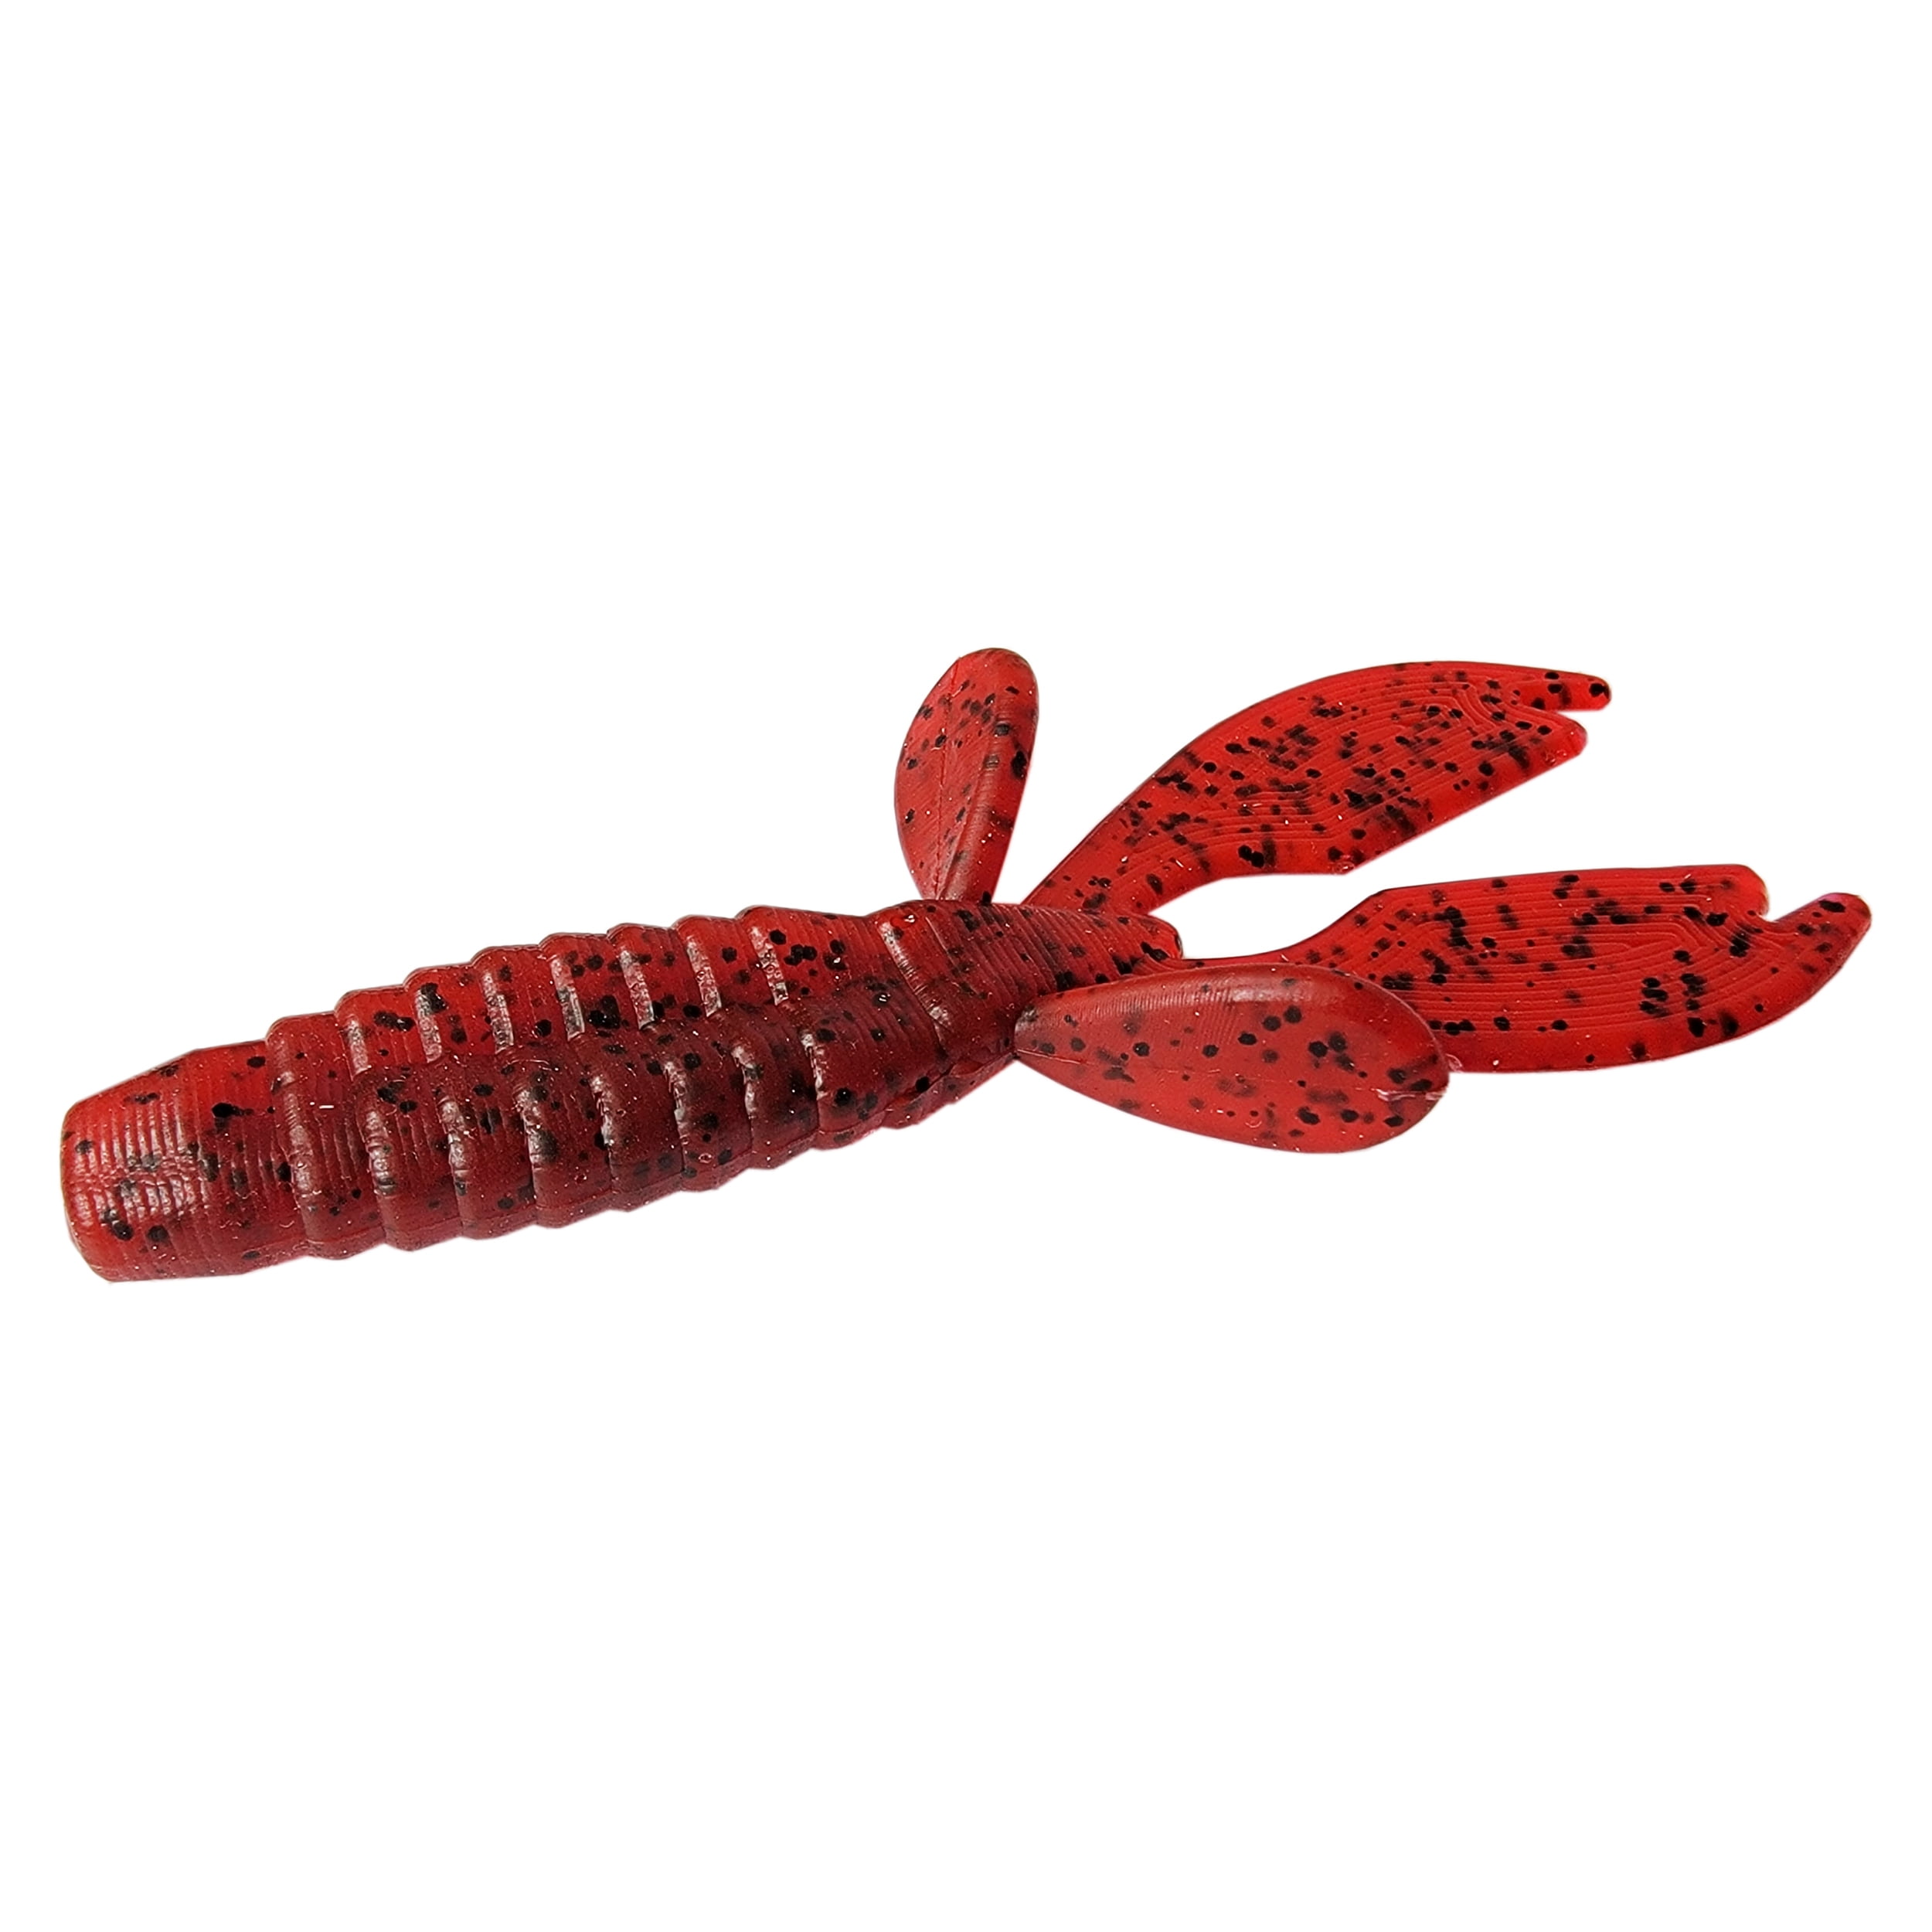 Tackle HD 10-Pack Texas Craw Beaver, 4.25 Twin Tail Fishing Bait, Soft  Plastic Fishing Lures and Jig Trailers for Bass Fishing, Crawfish Bass Lures,  Black Red Flake 